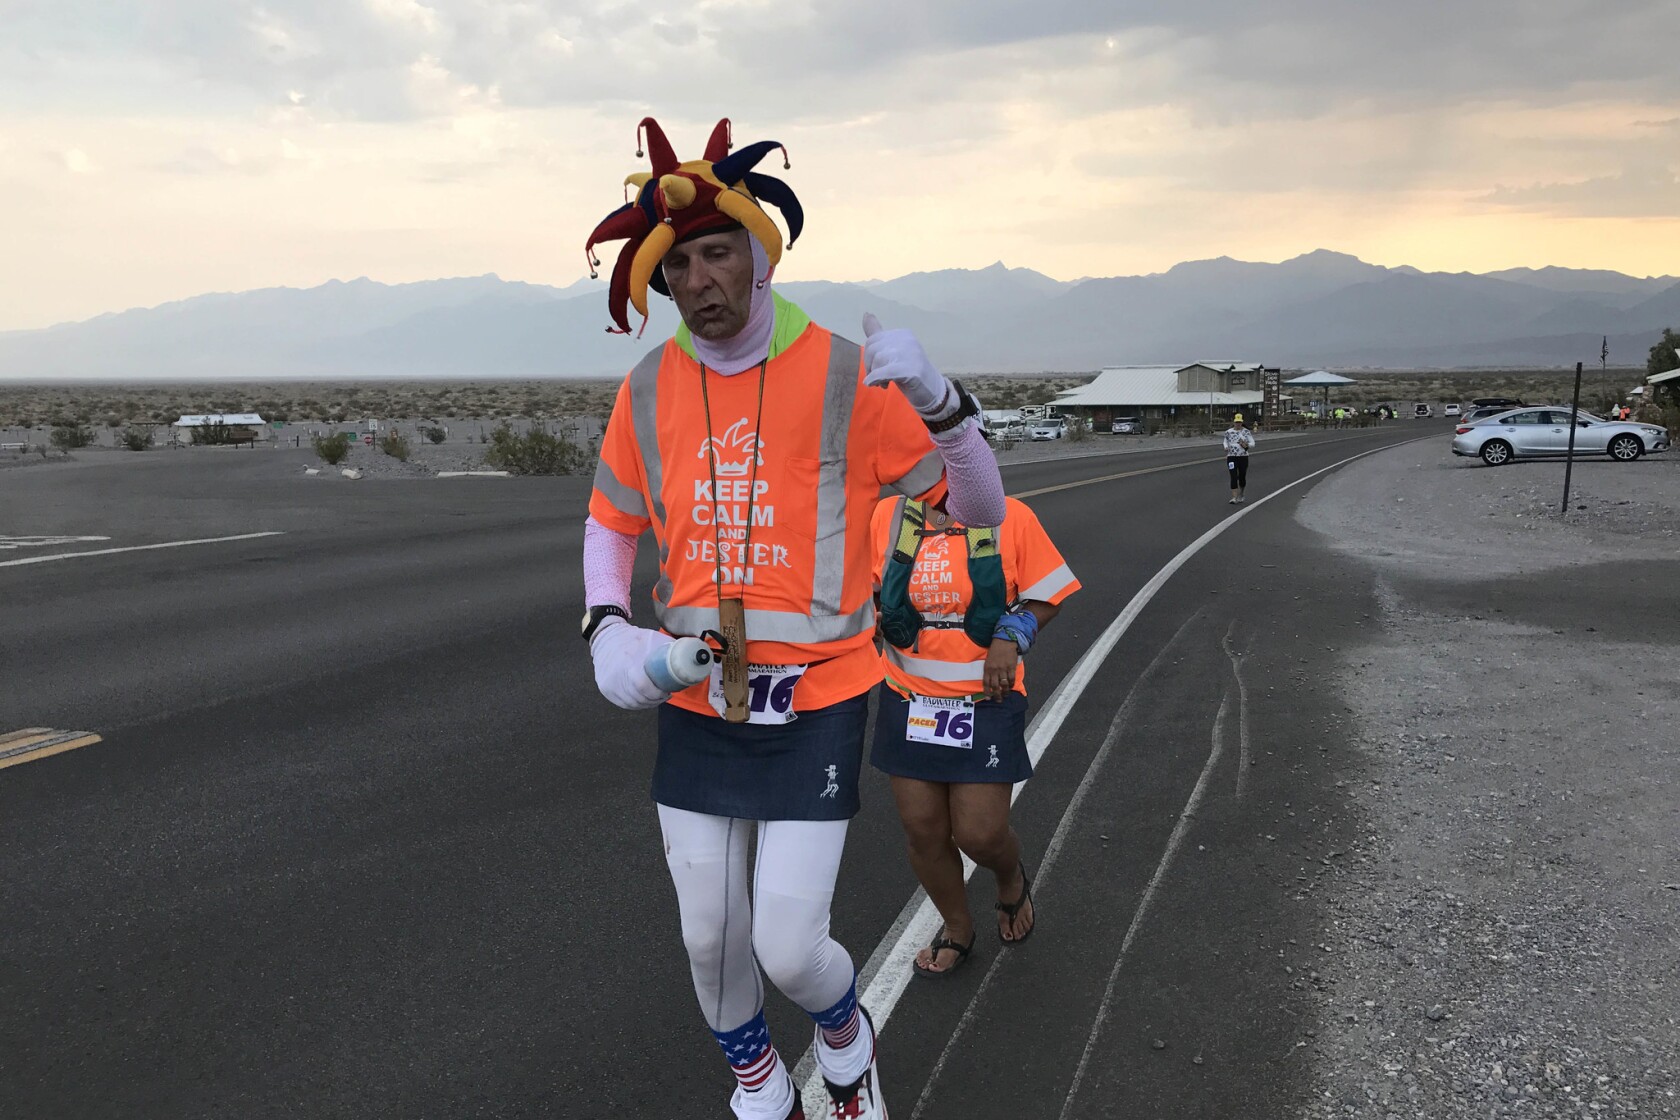 Not for wimps or toenails Badwater runners take on 135 miles of